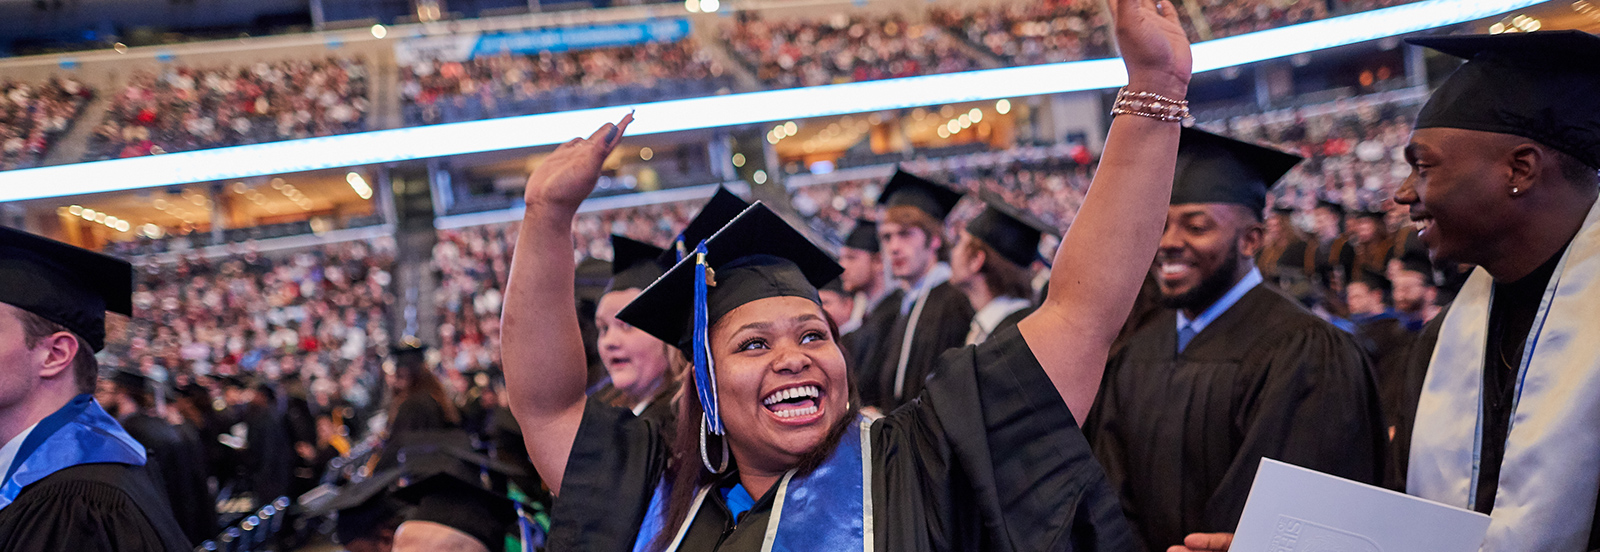 Graduate celebrating with arms raised in the air at Commencement ceremony